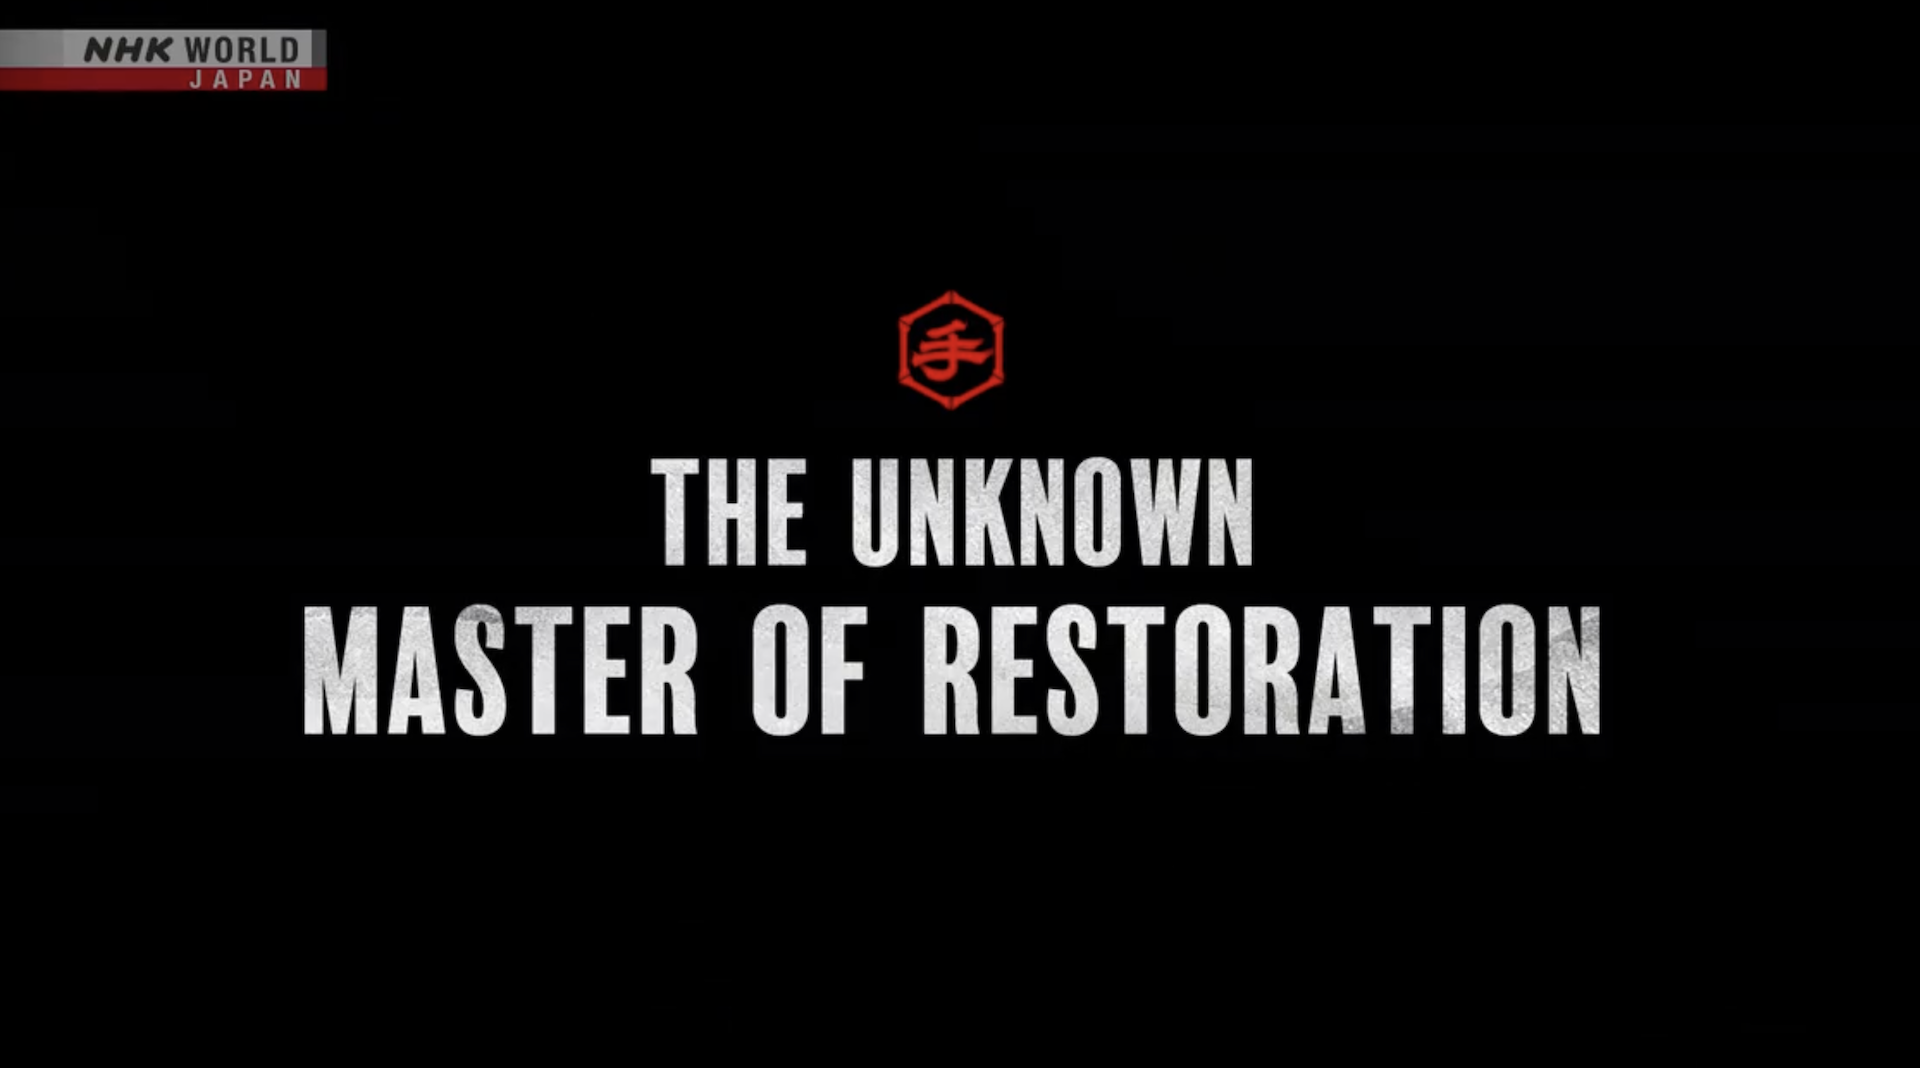 THE UNKNOWN MASTER OF RESTORATION